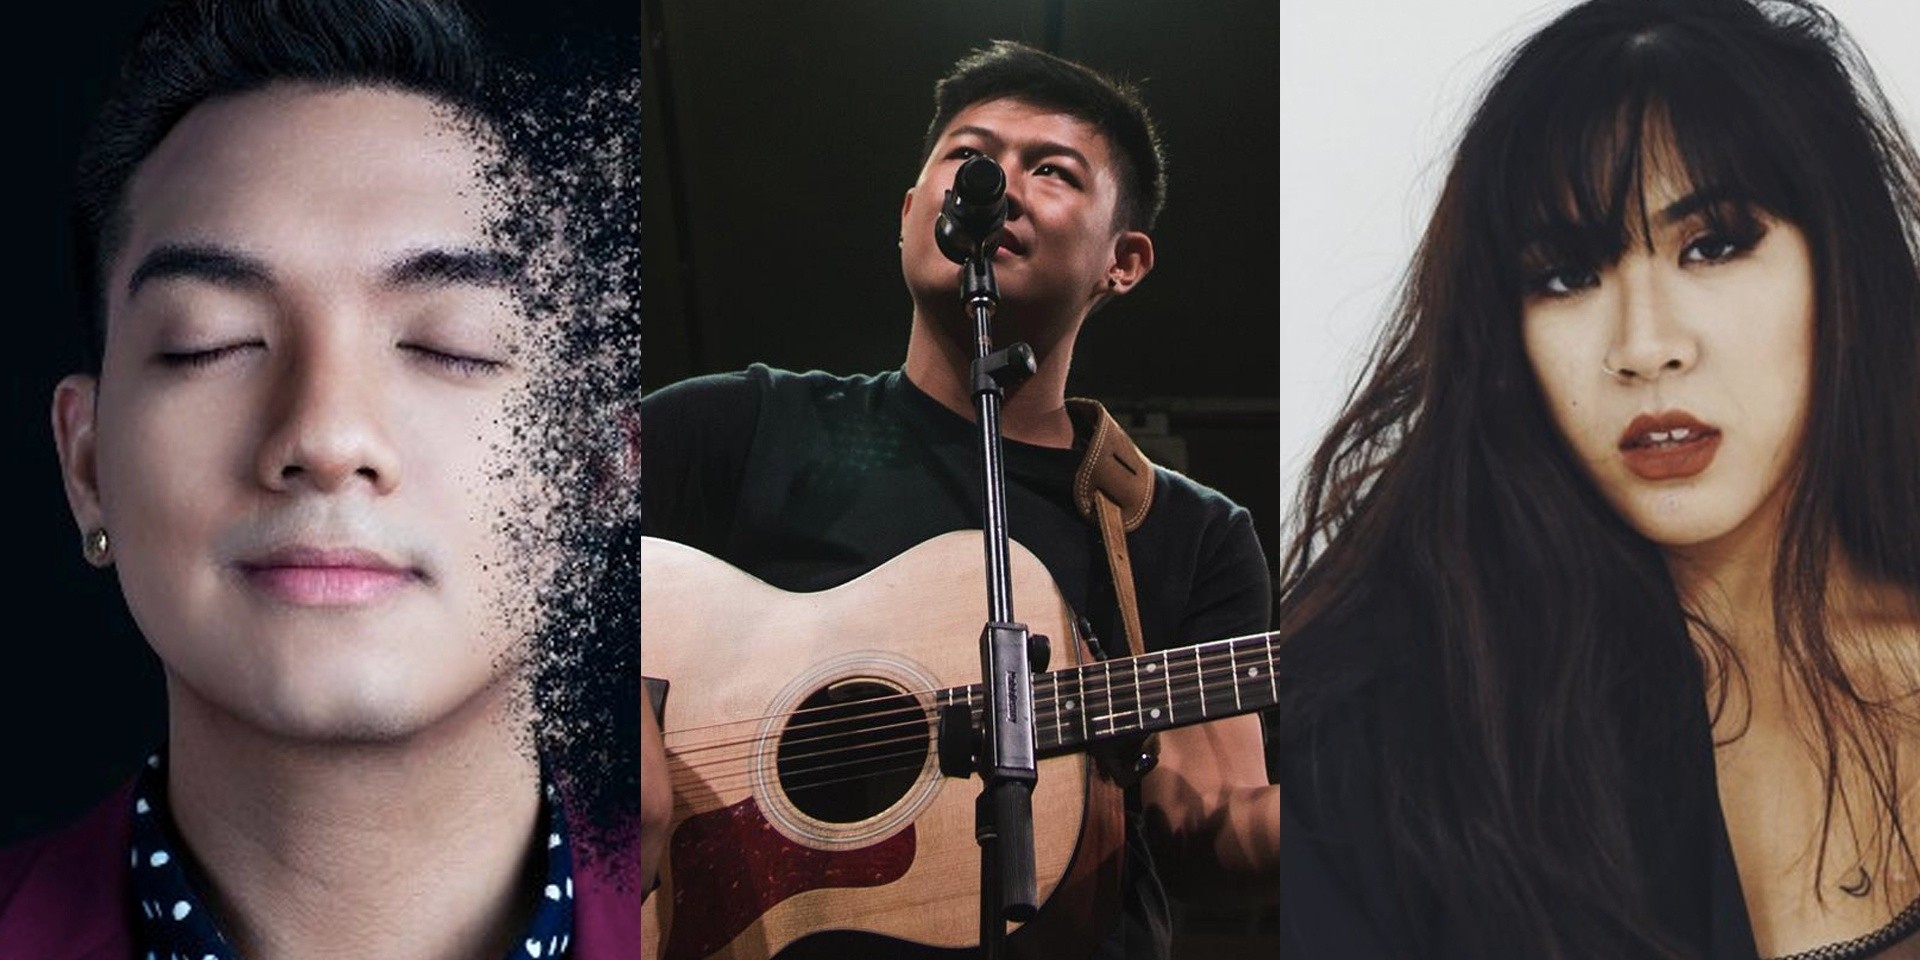 Sam Rui, Gareth Fernandez, LEW and more to help raise funds for SMU Habitat For Humanity